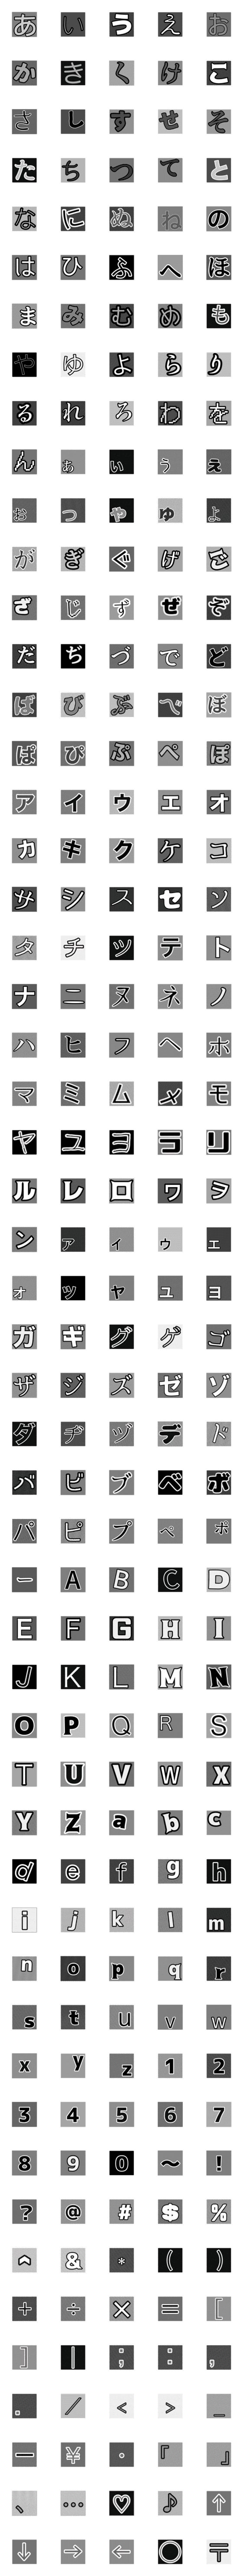 [LINE絵文字]予告状の絵文字の画像一覧